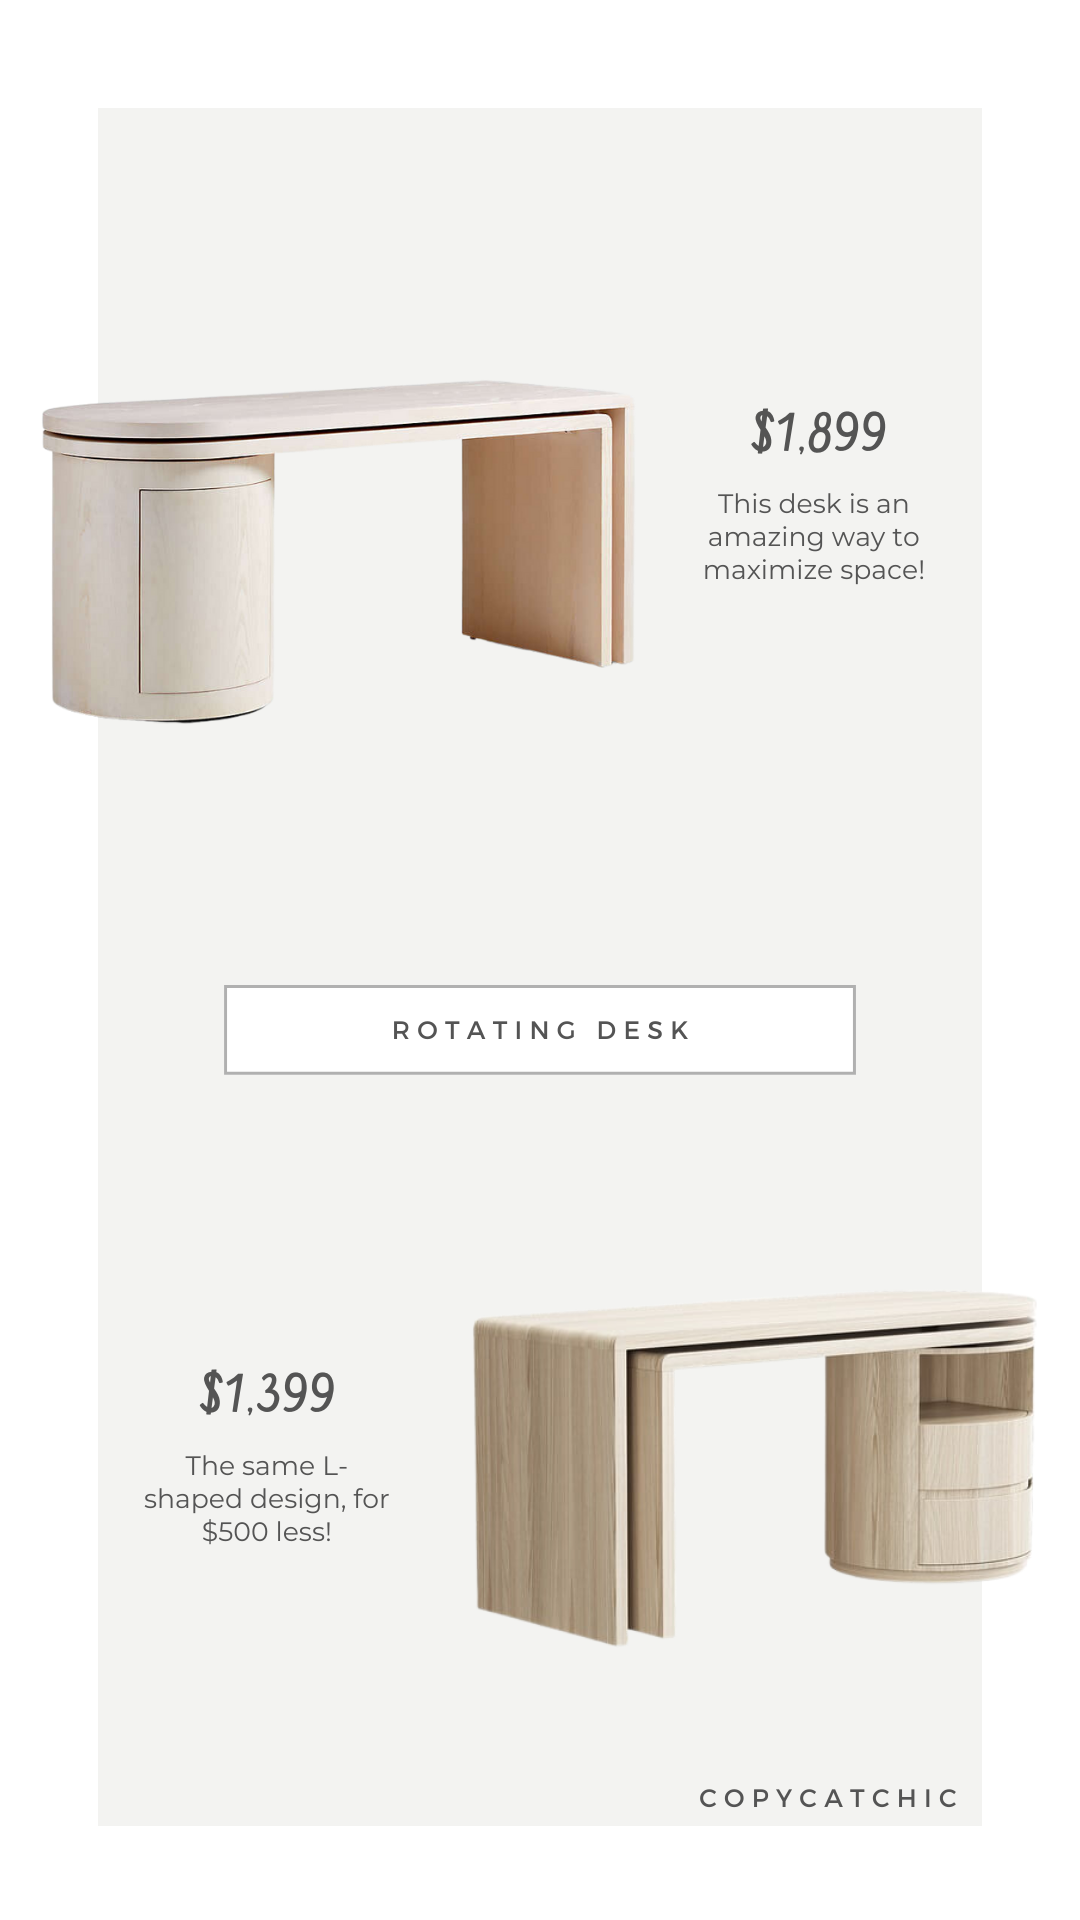 Look for Less: CB2 Twist Whitewashed Wood Rotating Desk vs. Homary Modern Wash L Shaped Desk